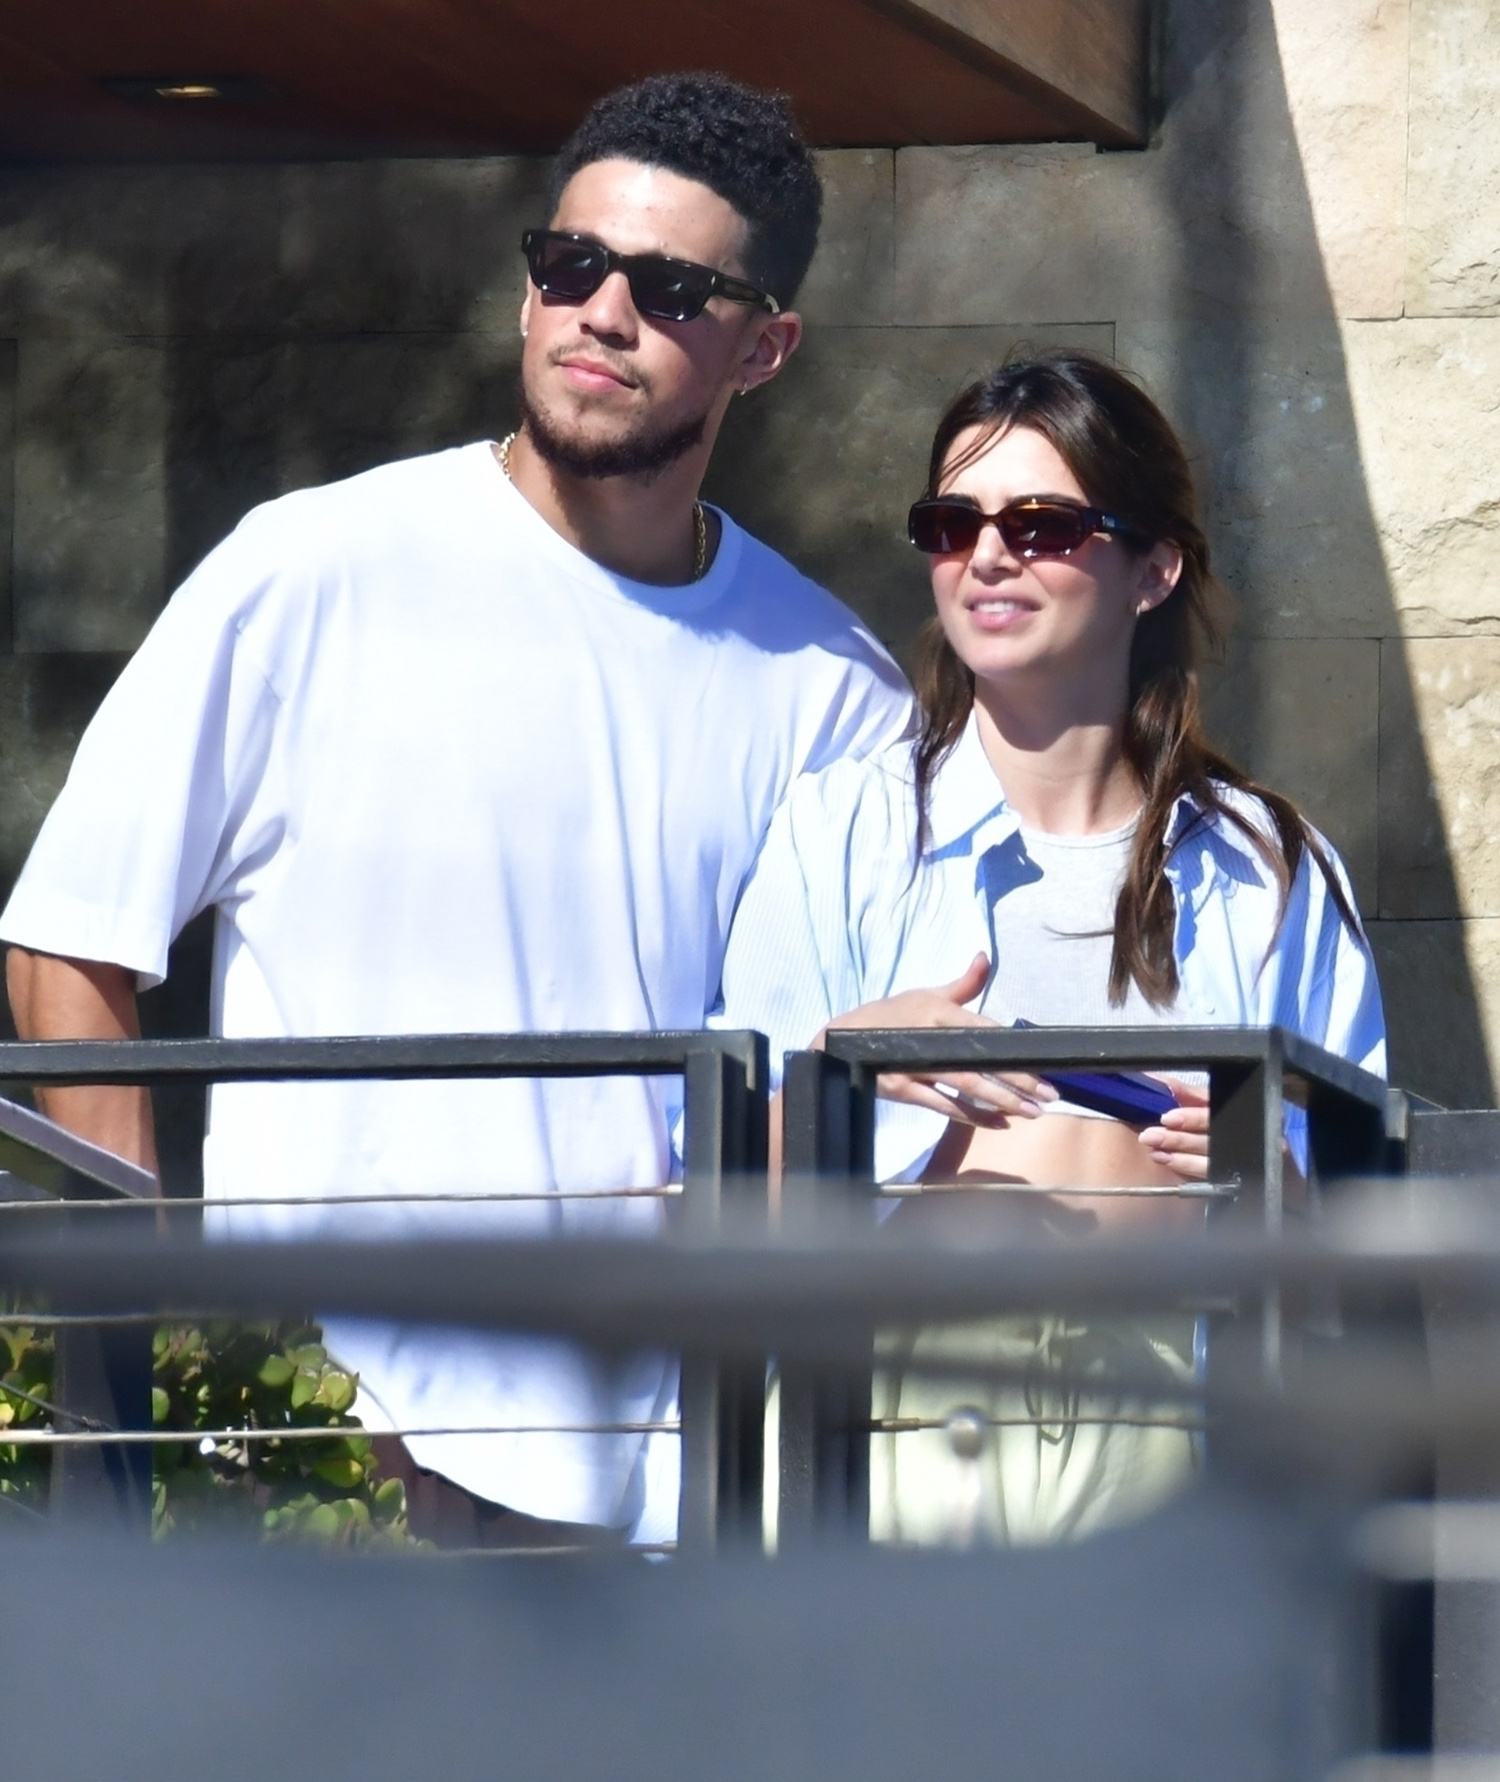 Kendall Jenner and Devin Booker at Malibu